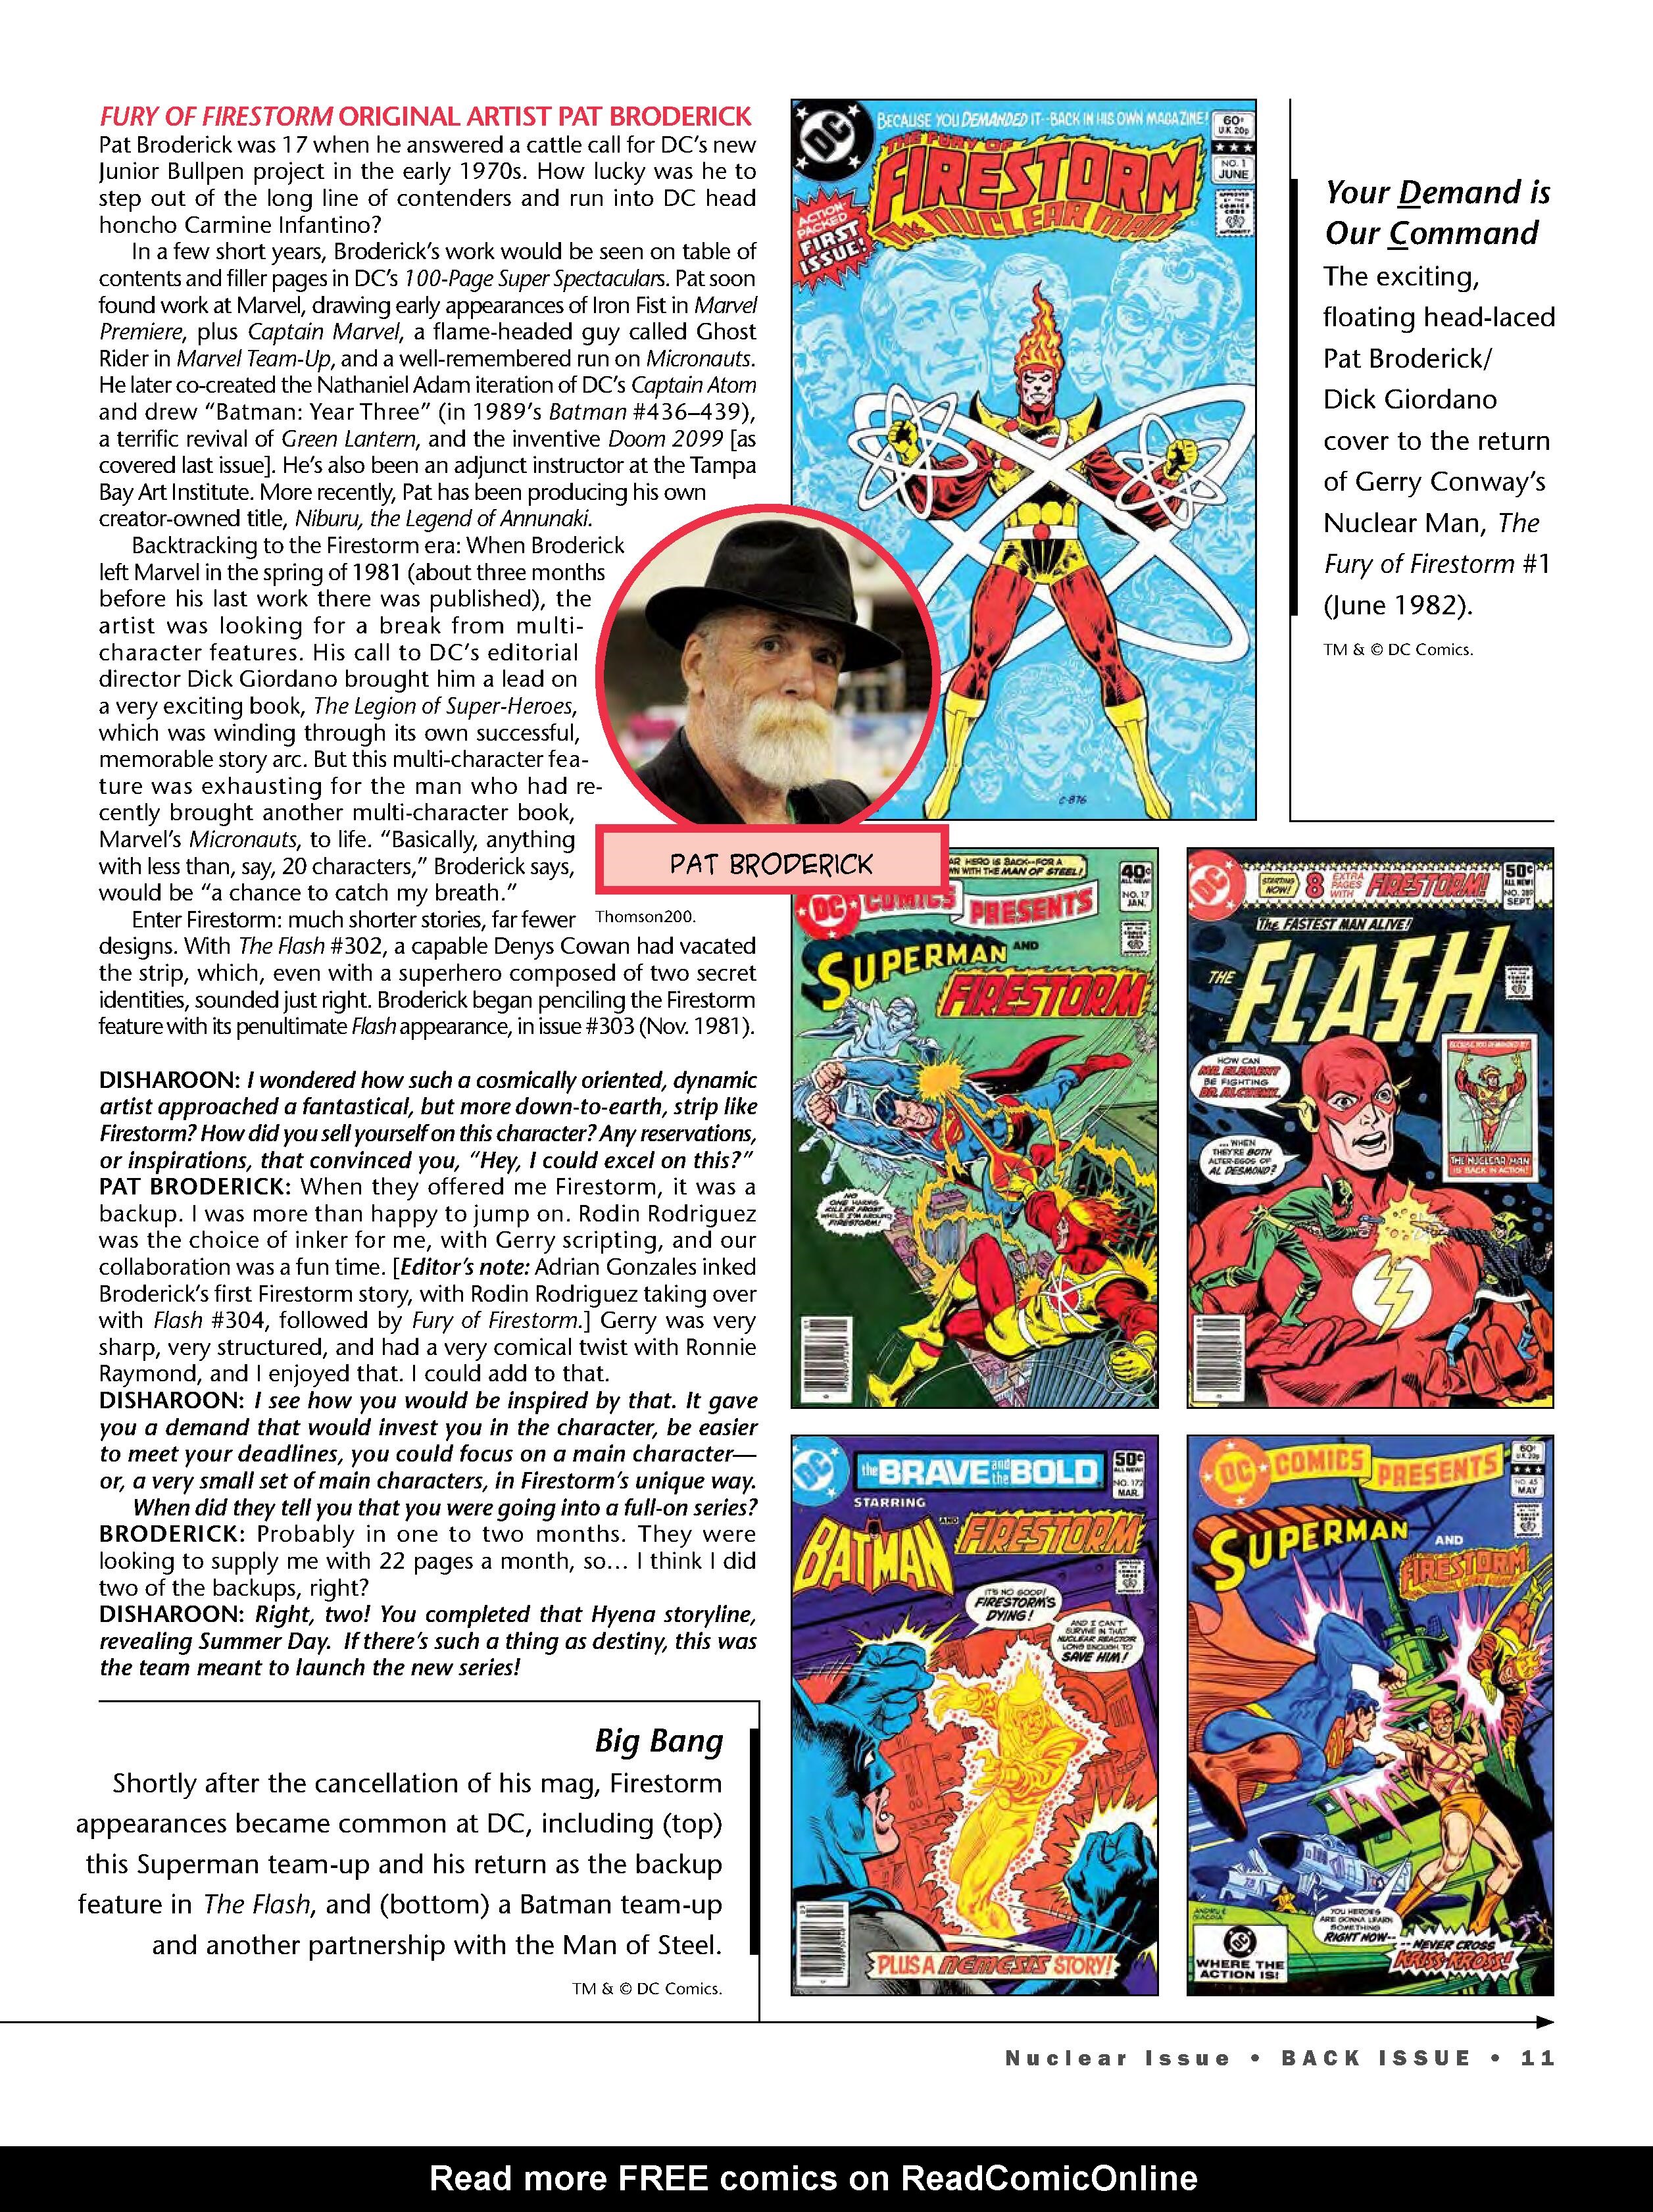 Read online Back Issue comic -  Issue #112 - 13